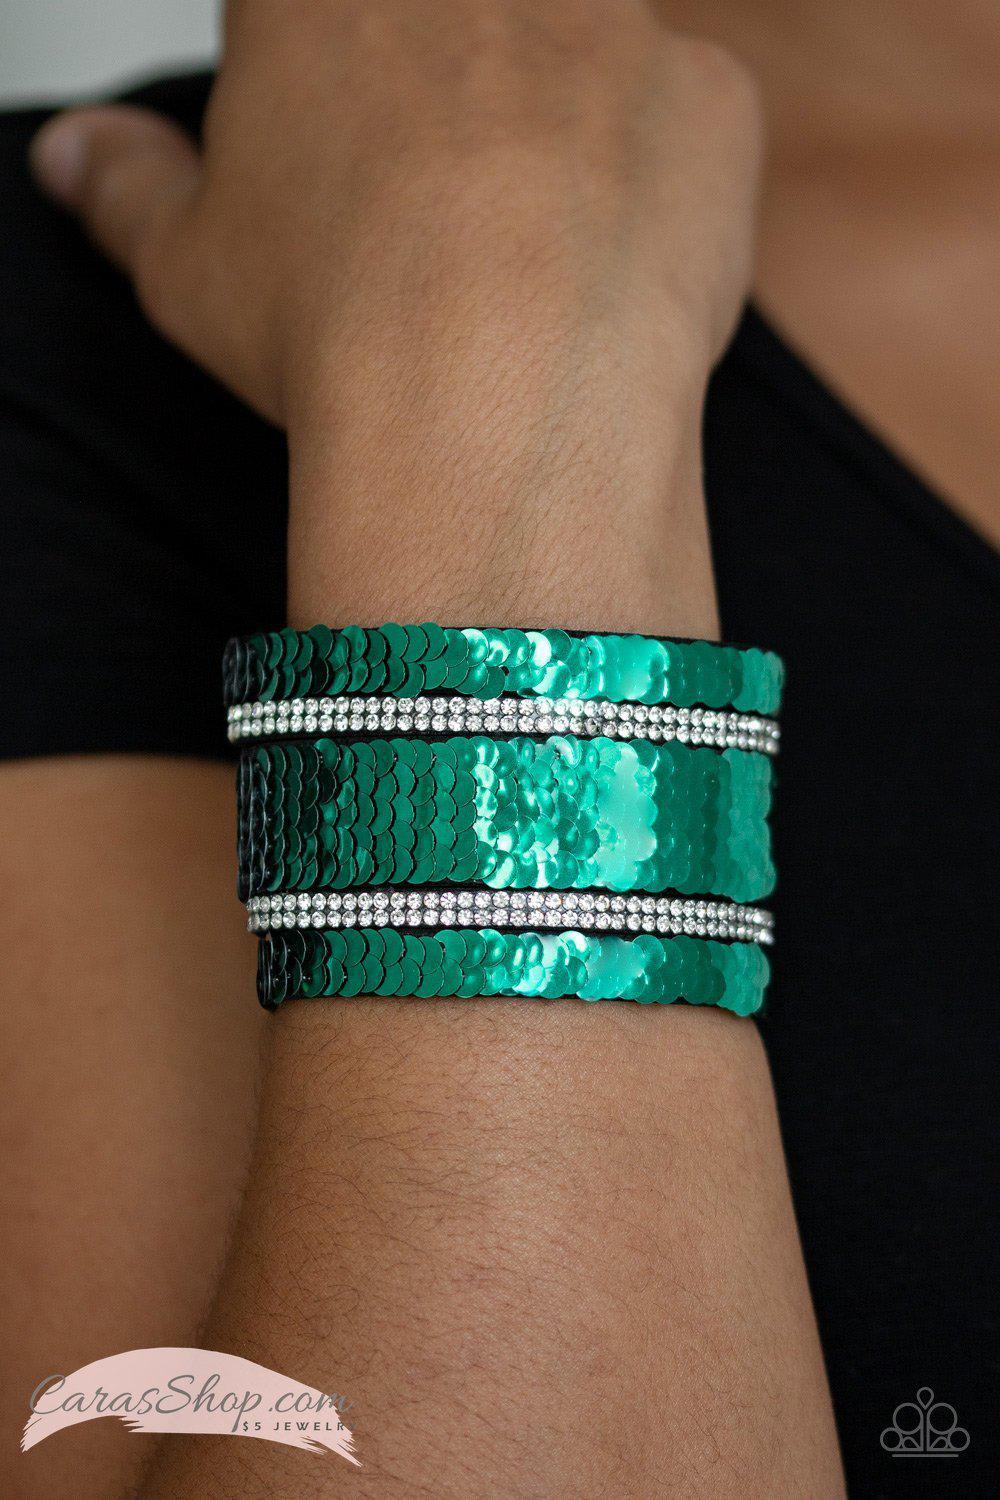 Mermaid Service Green and Silver Reversible Sequin Wrap Snap Bracelet - Paparazzi Accessories-CarasShop.com - $5 Jewelry by Cara Jewels